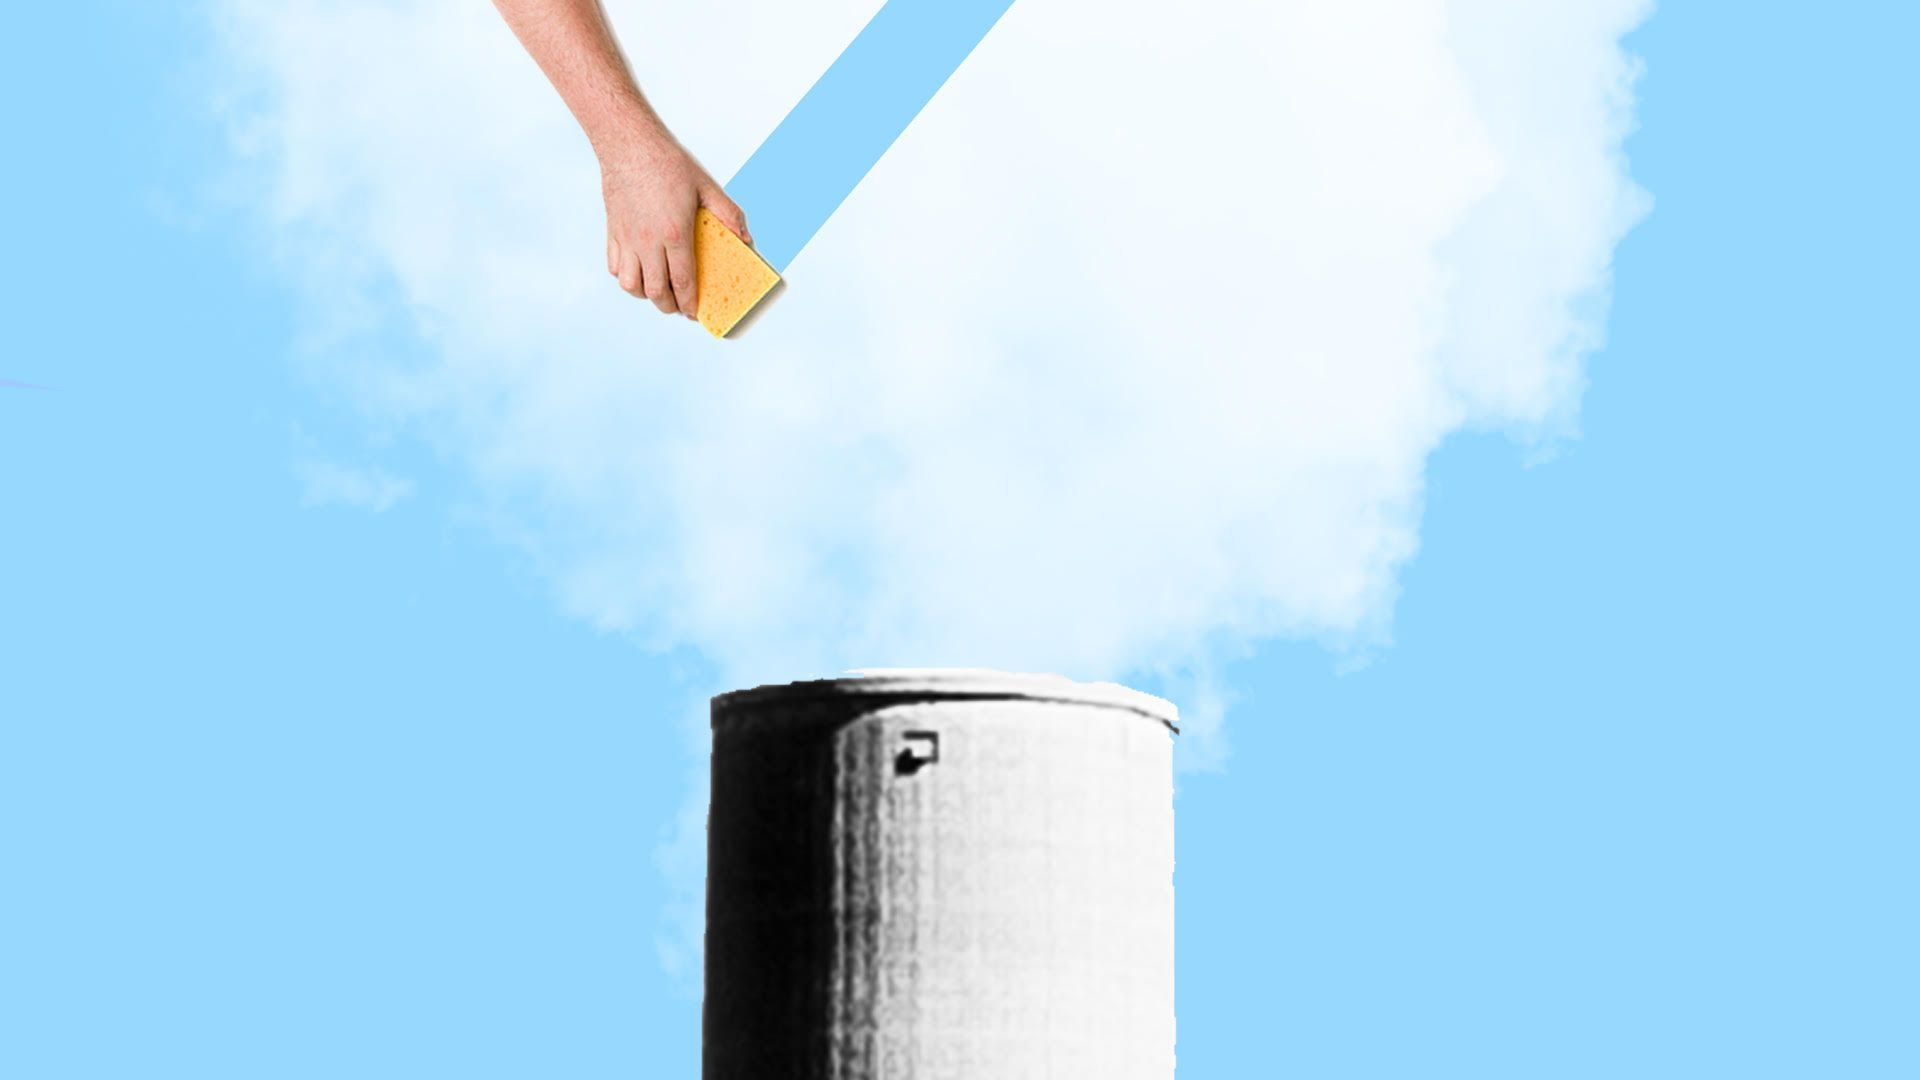 Cleaning a smokestack